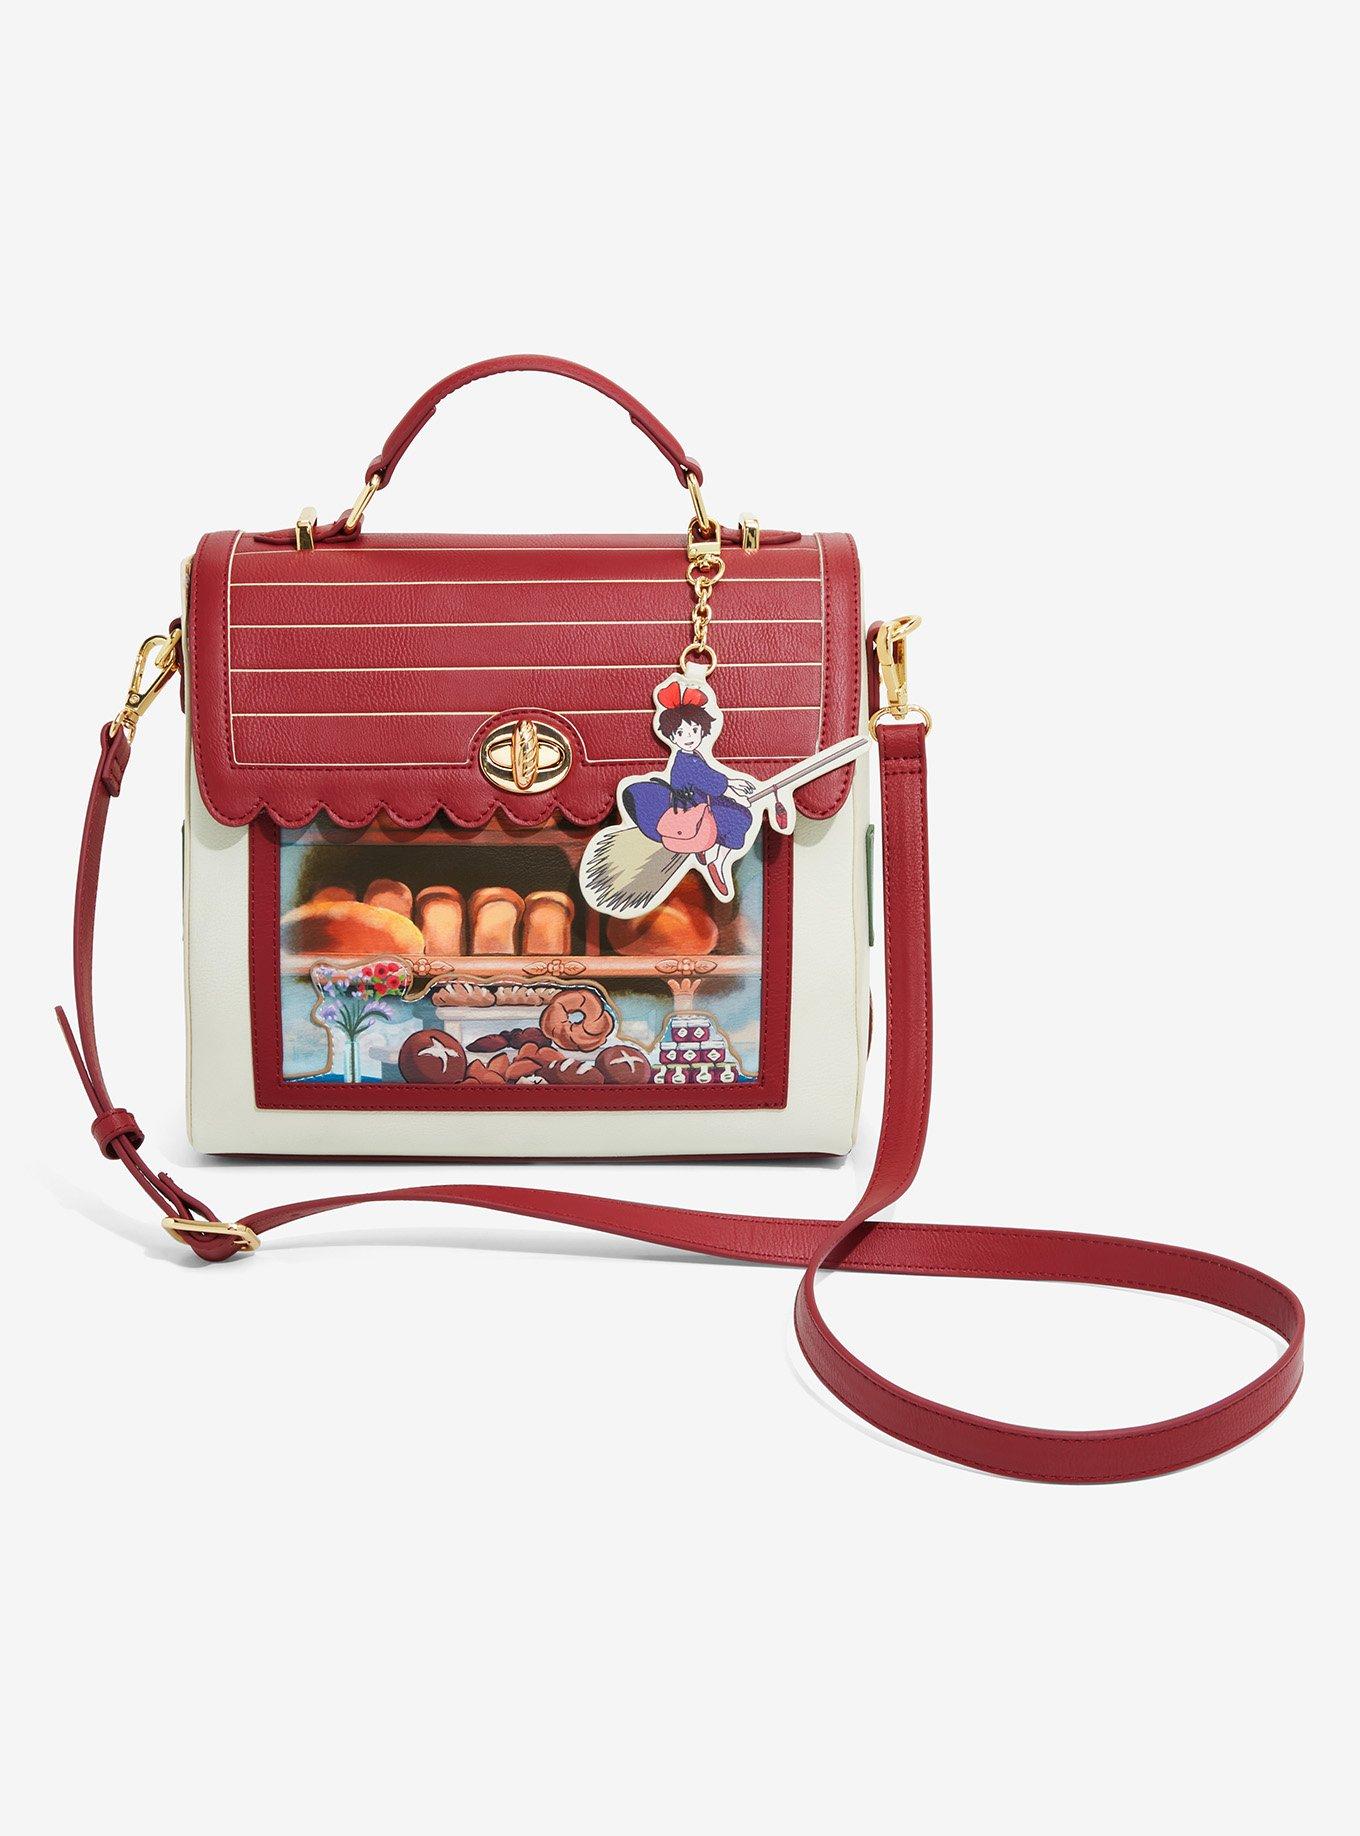 Our Universe Studio Ghibli Kiki's Delivery Service Bakery Figural Crossbody Bag - BoxLunch Exclusive